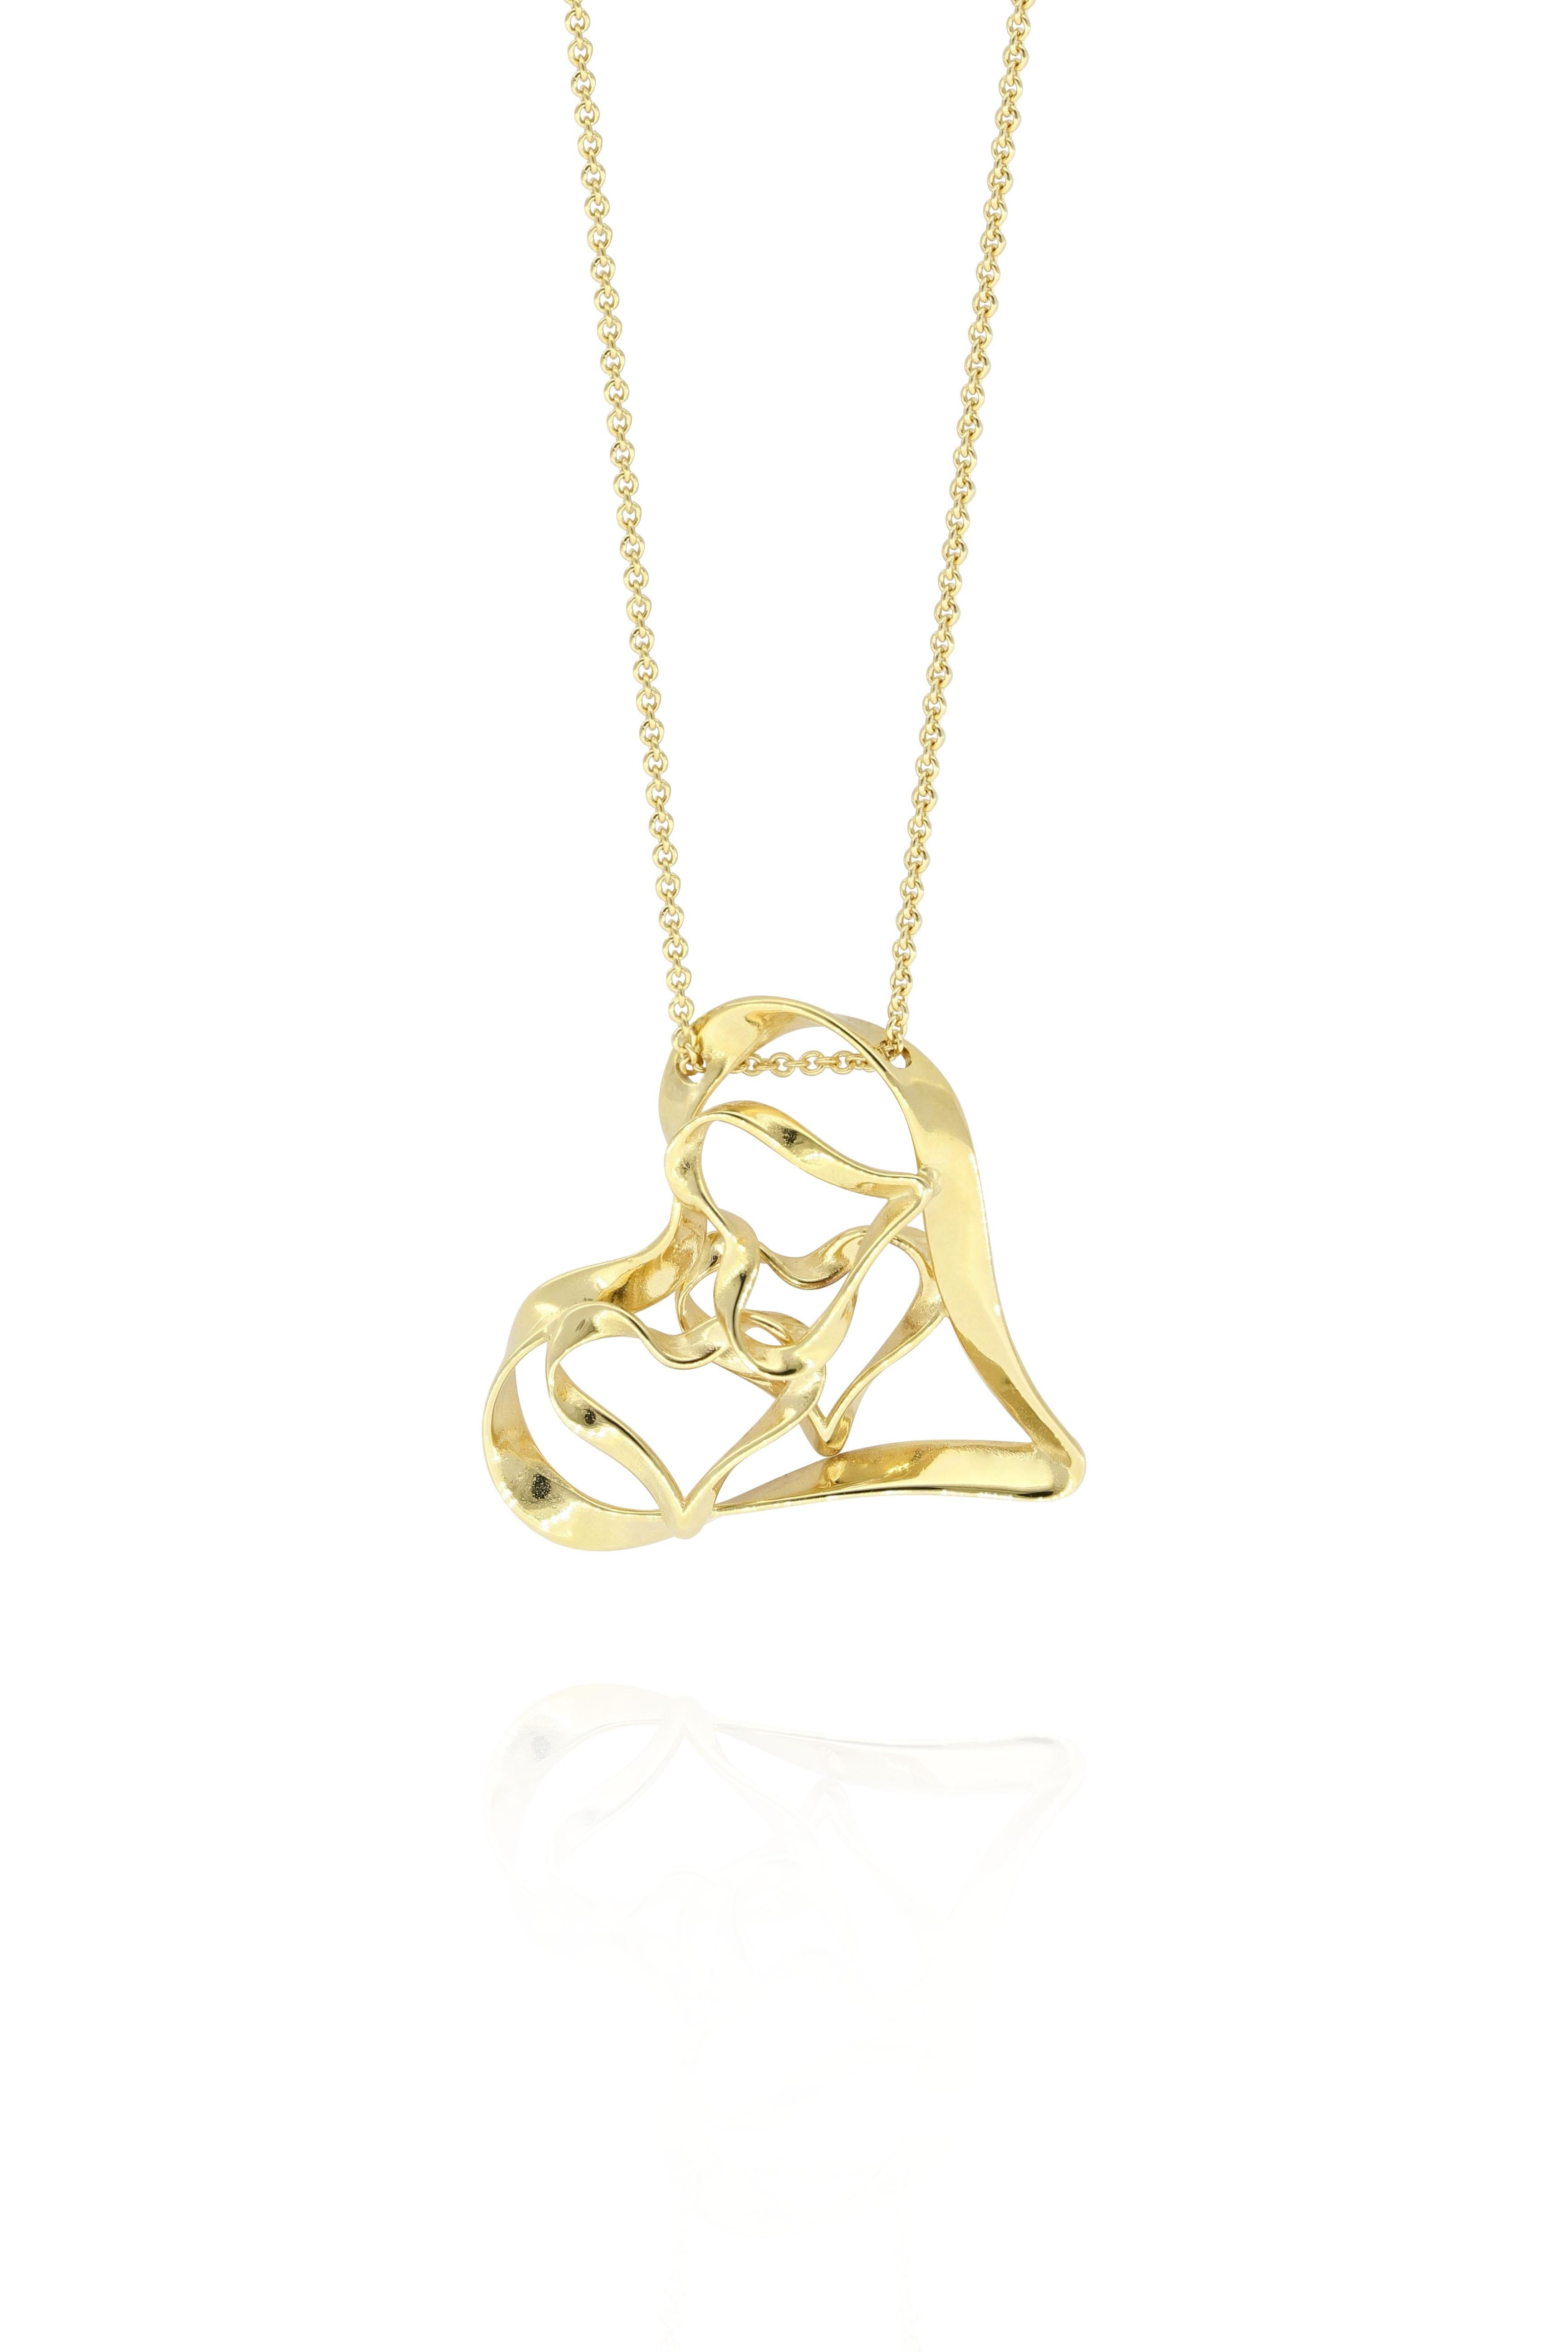 This beautiful heart shape pendant necklace, decorated with three interlocking smaller hearts in abstract form, with superb craftsmanship. It is a perfect accessory for modern and sophisticated women.
The company was founded one and a half centuries